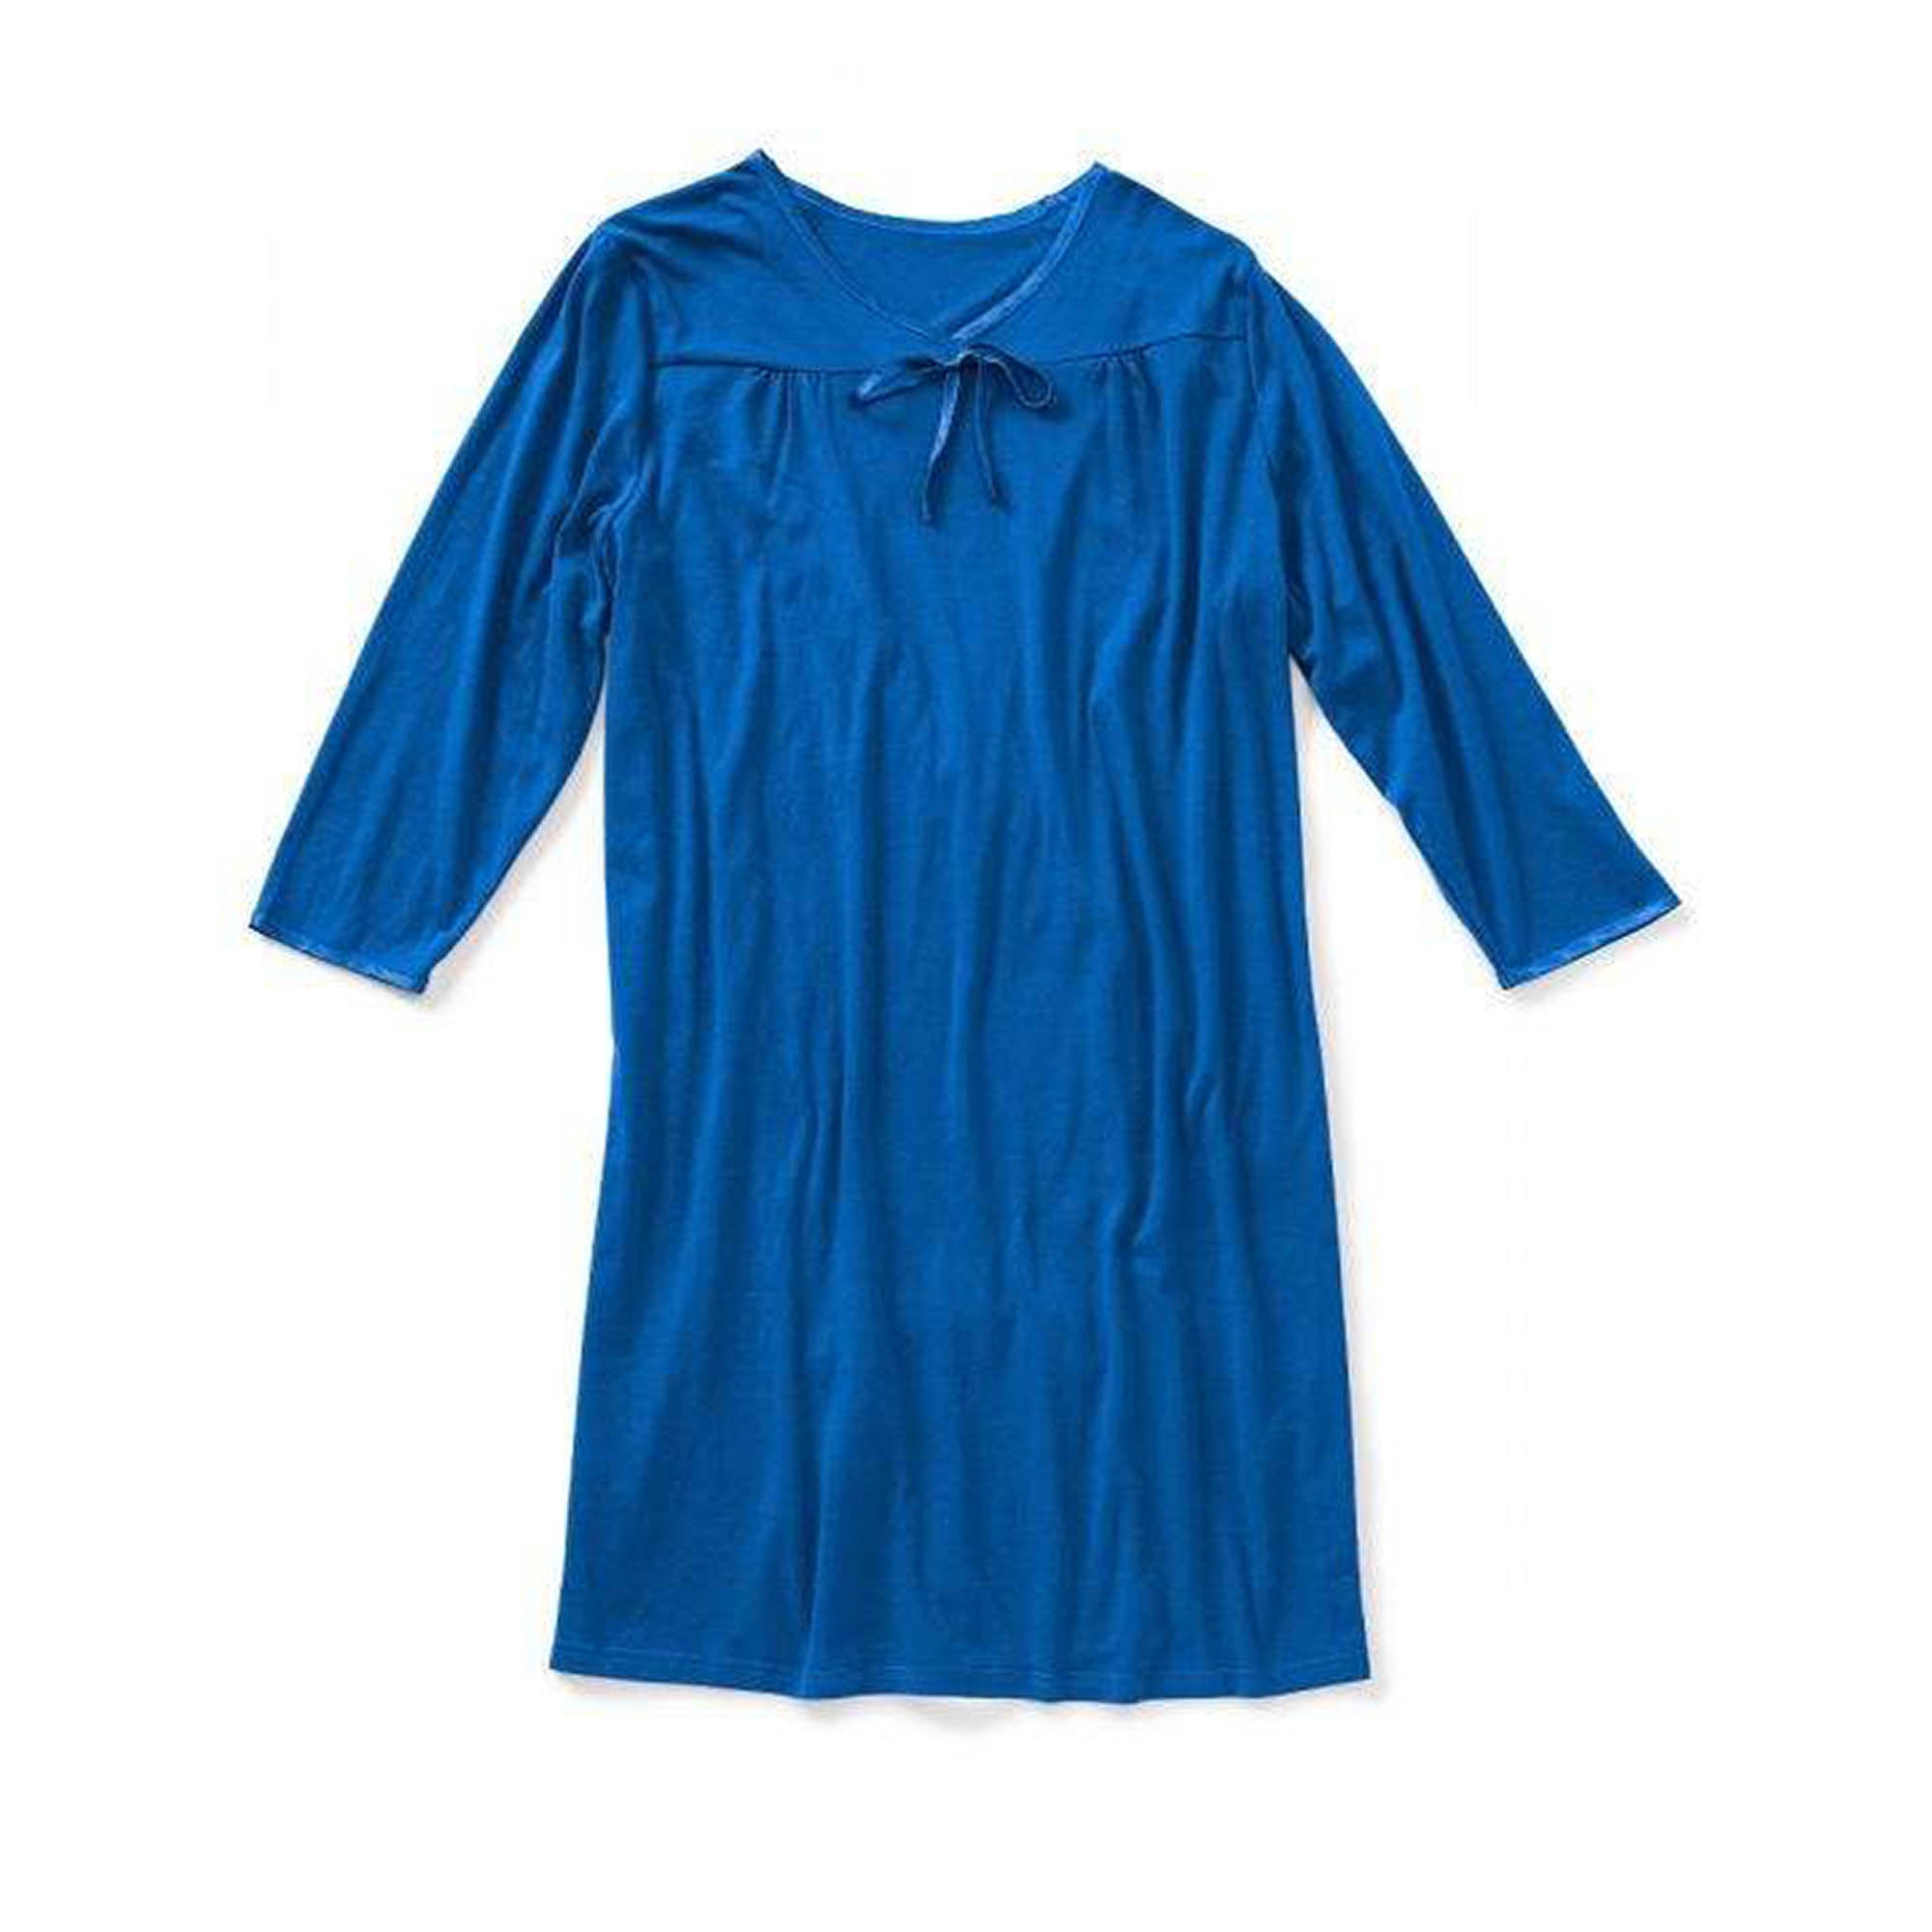 Silverts Women's Open Back Antimicrobial Long-sleeve Nightgown - Adaptive Clothing - Blue - XL